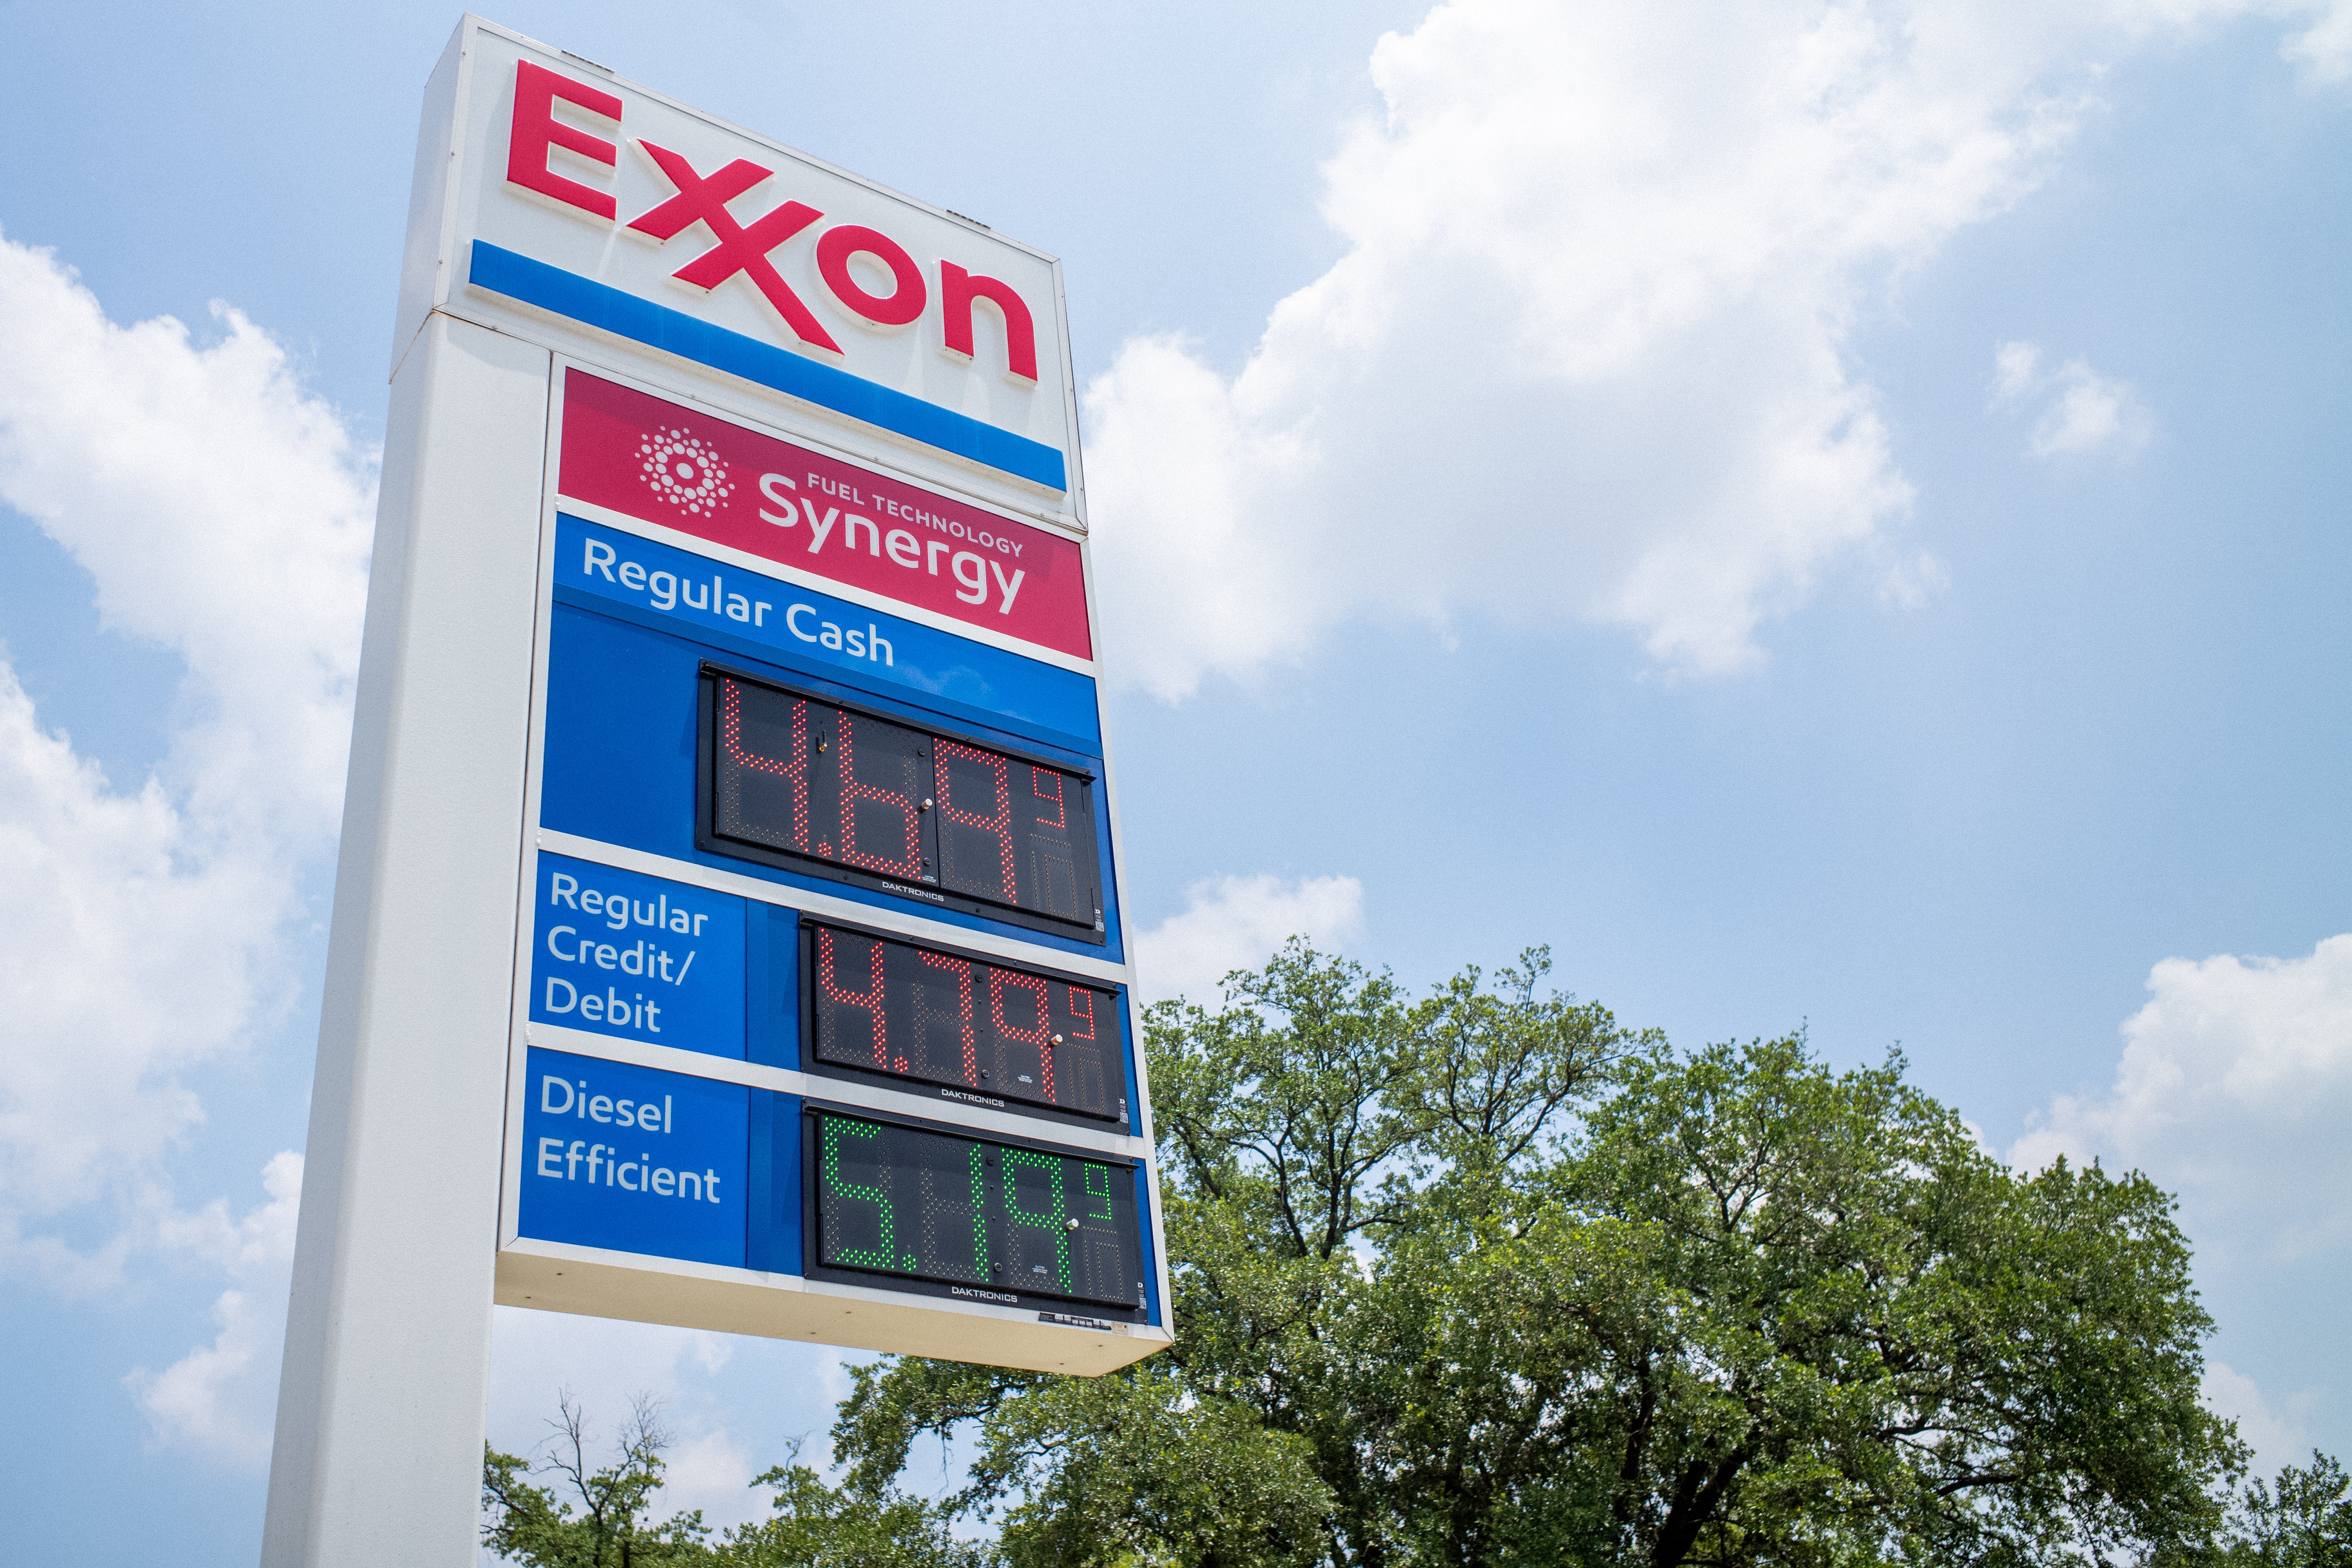 Gas prices are seen on an Exxon Mobil gas station sign on 9 June 2022 in Houston, Texas